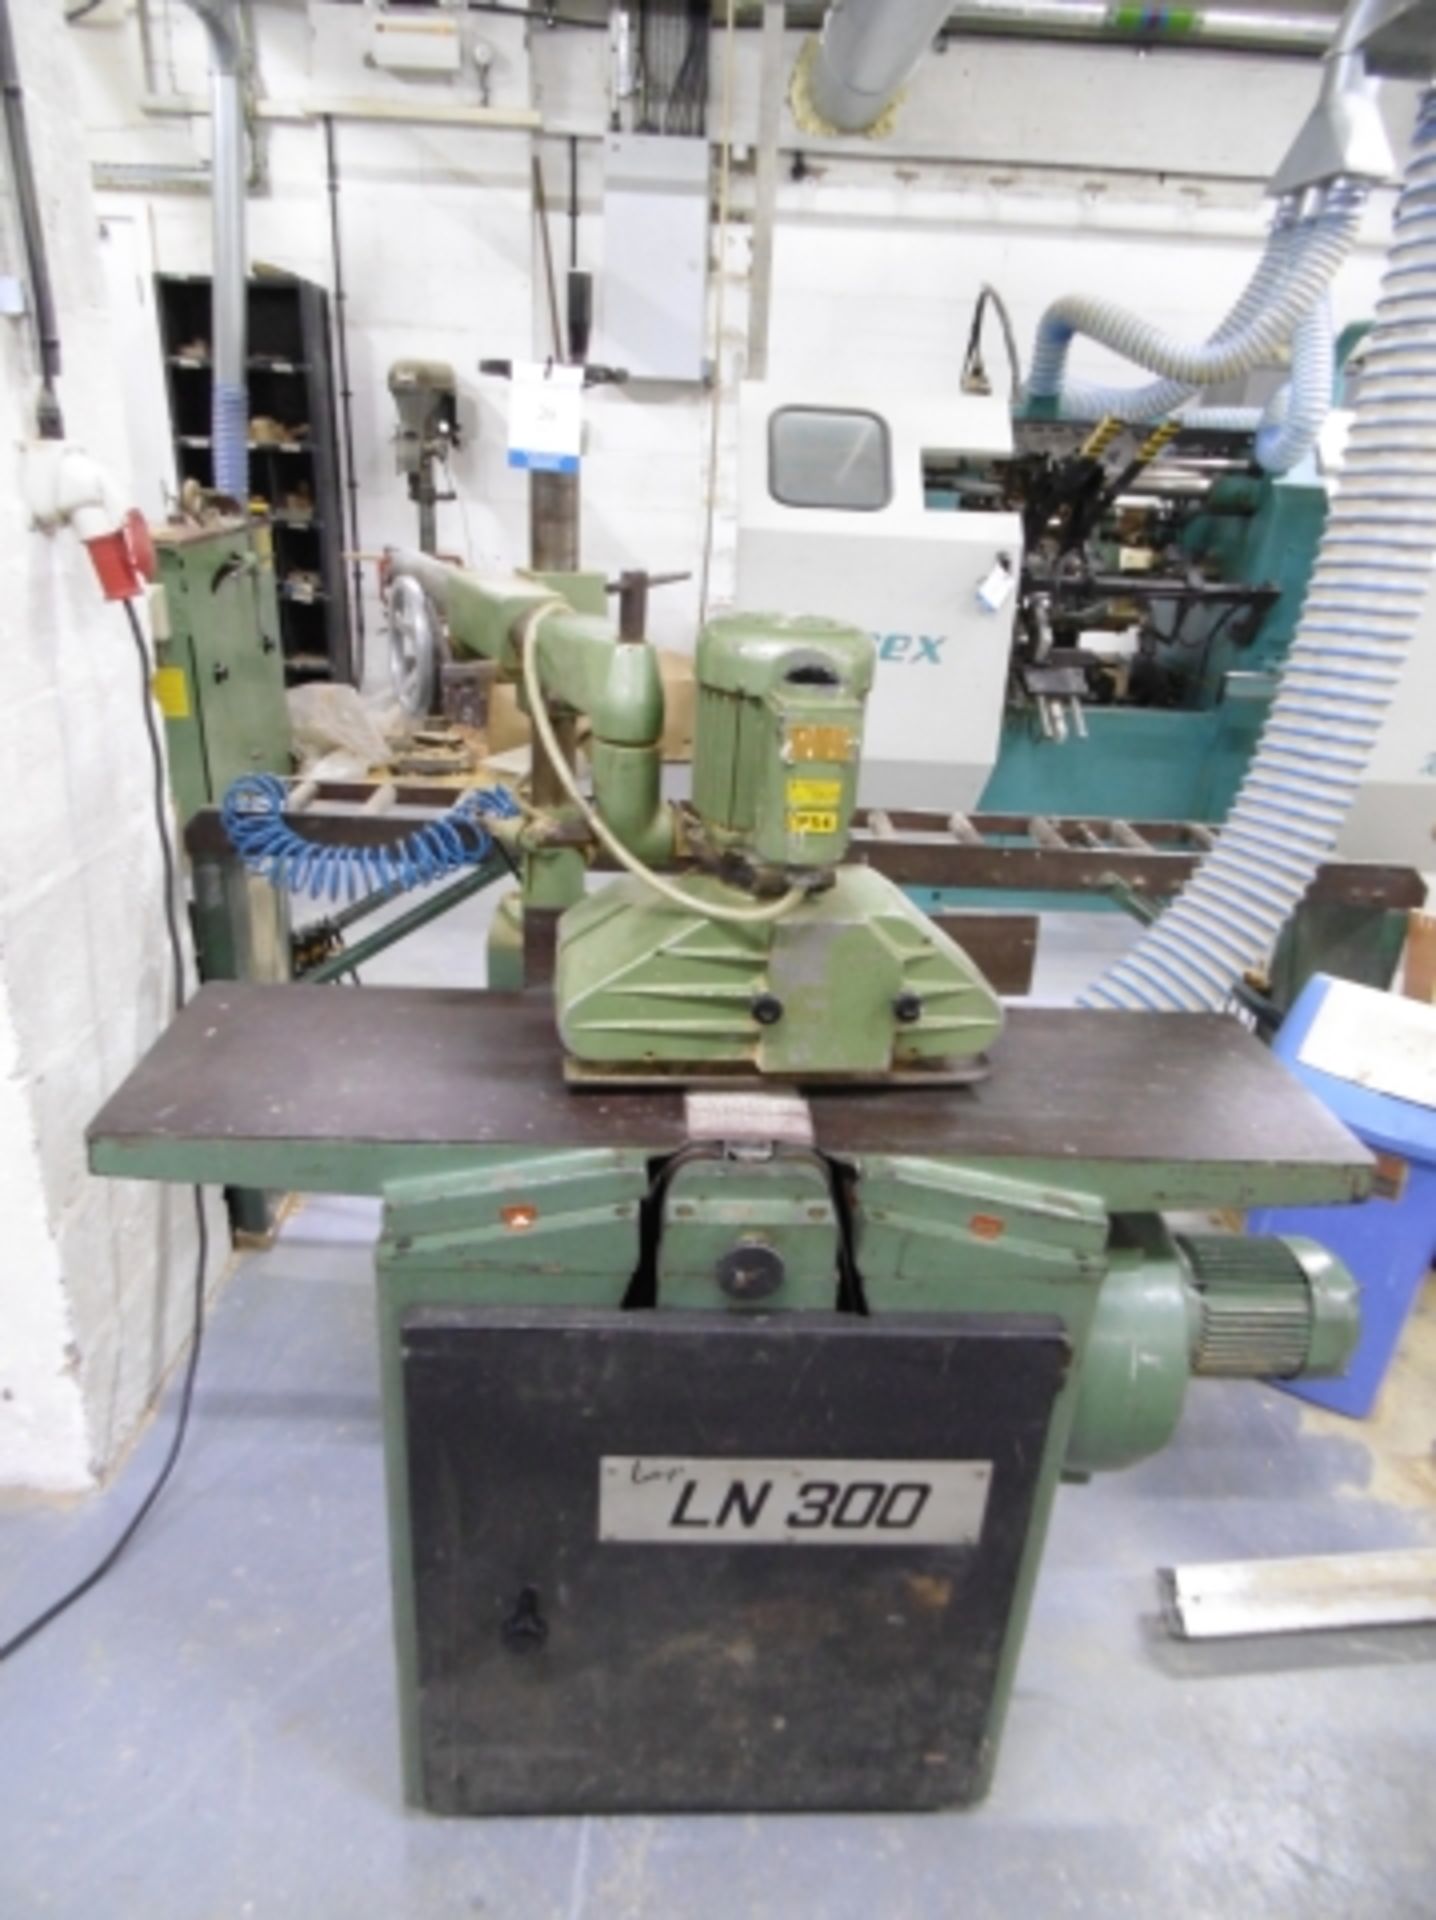 * Europa LN300 Bottom Belt Sander with Samco Power Feed. 300mm wide belt and 1230mm table length.